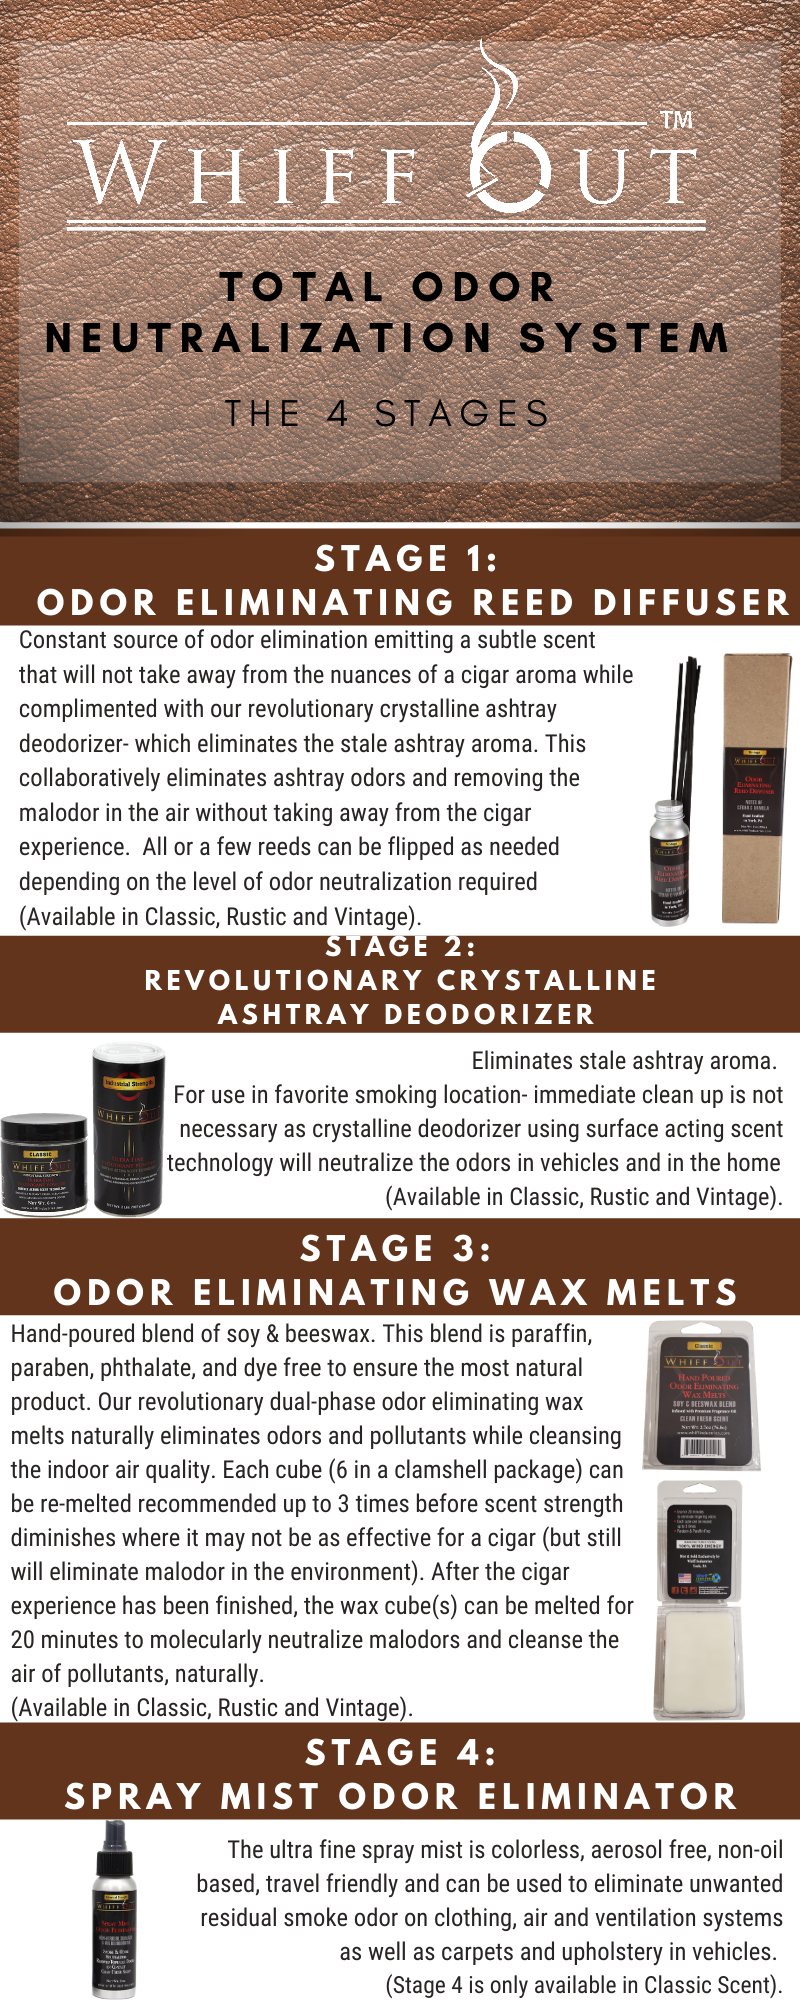 Whiff Out Total Odor Neutralization System